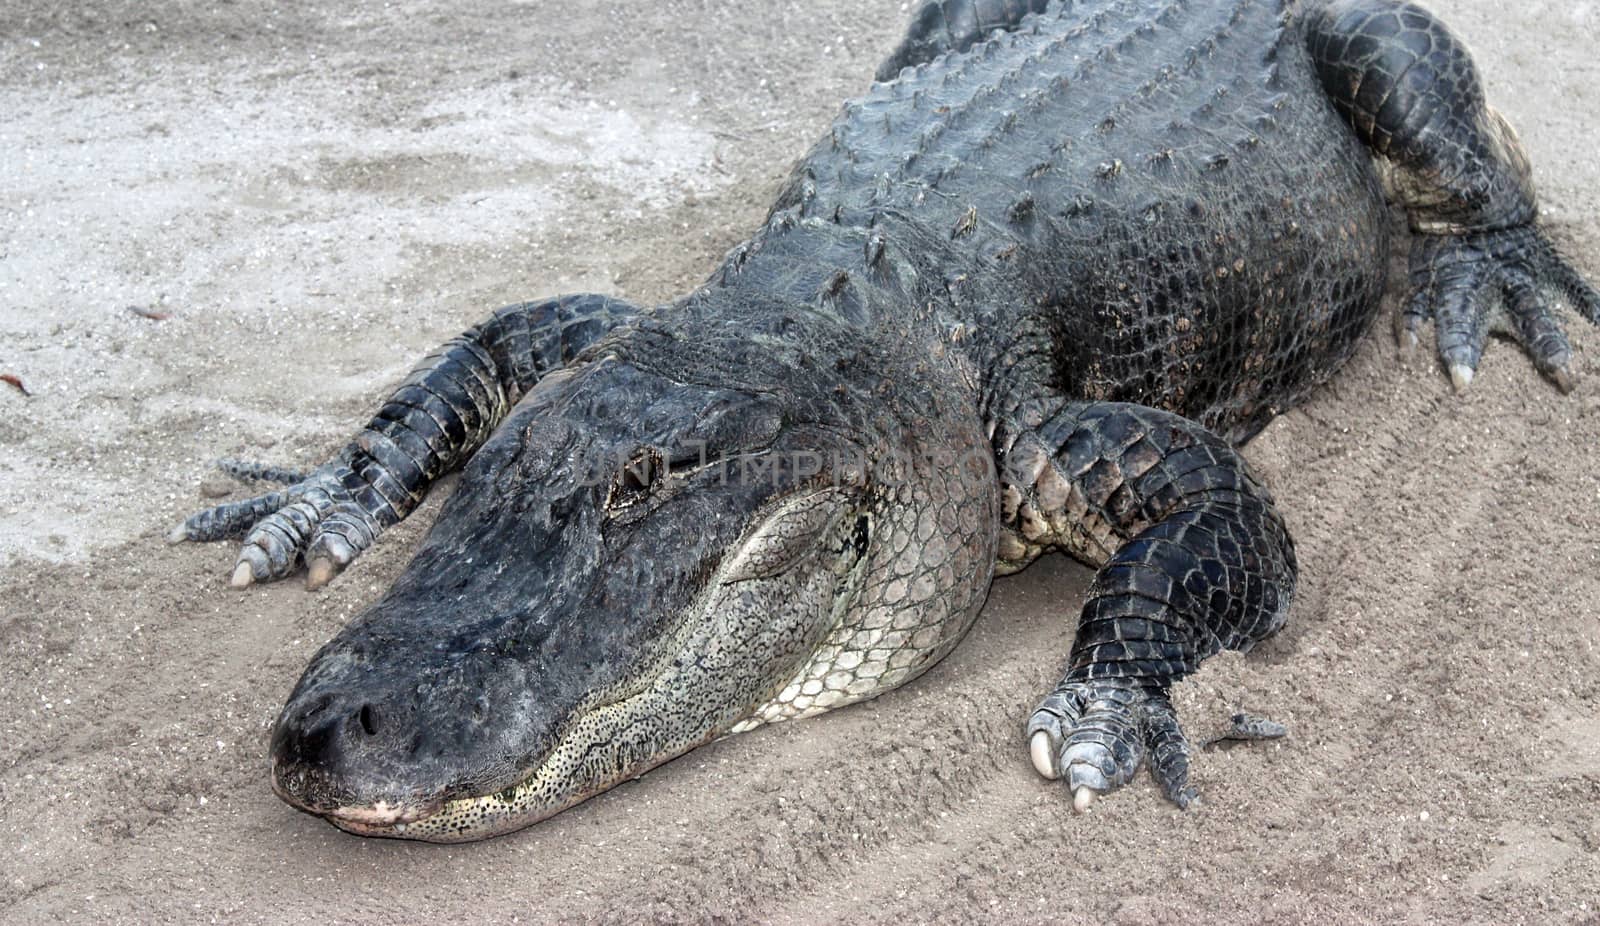 Alligator laying on the ground